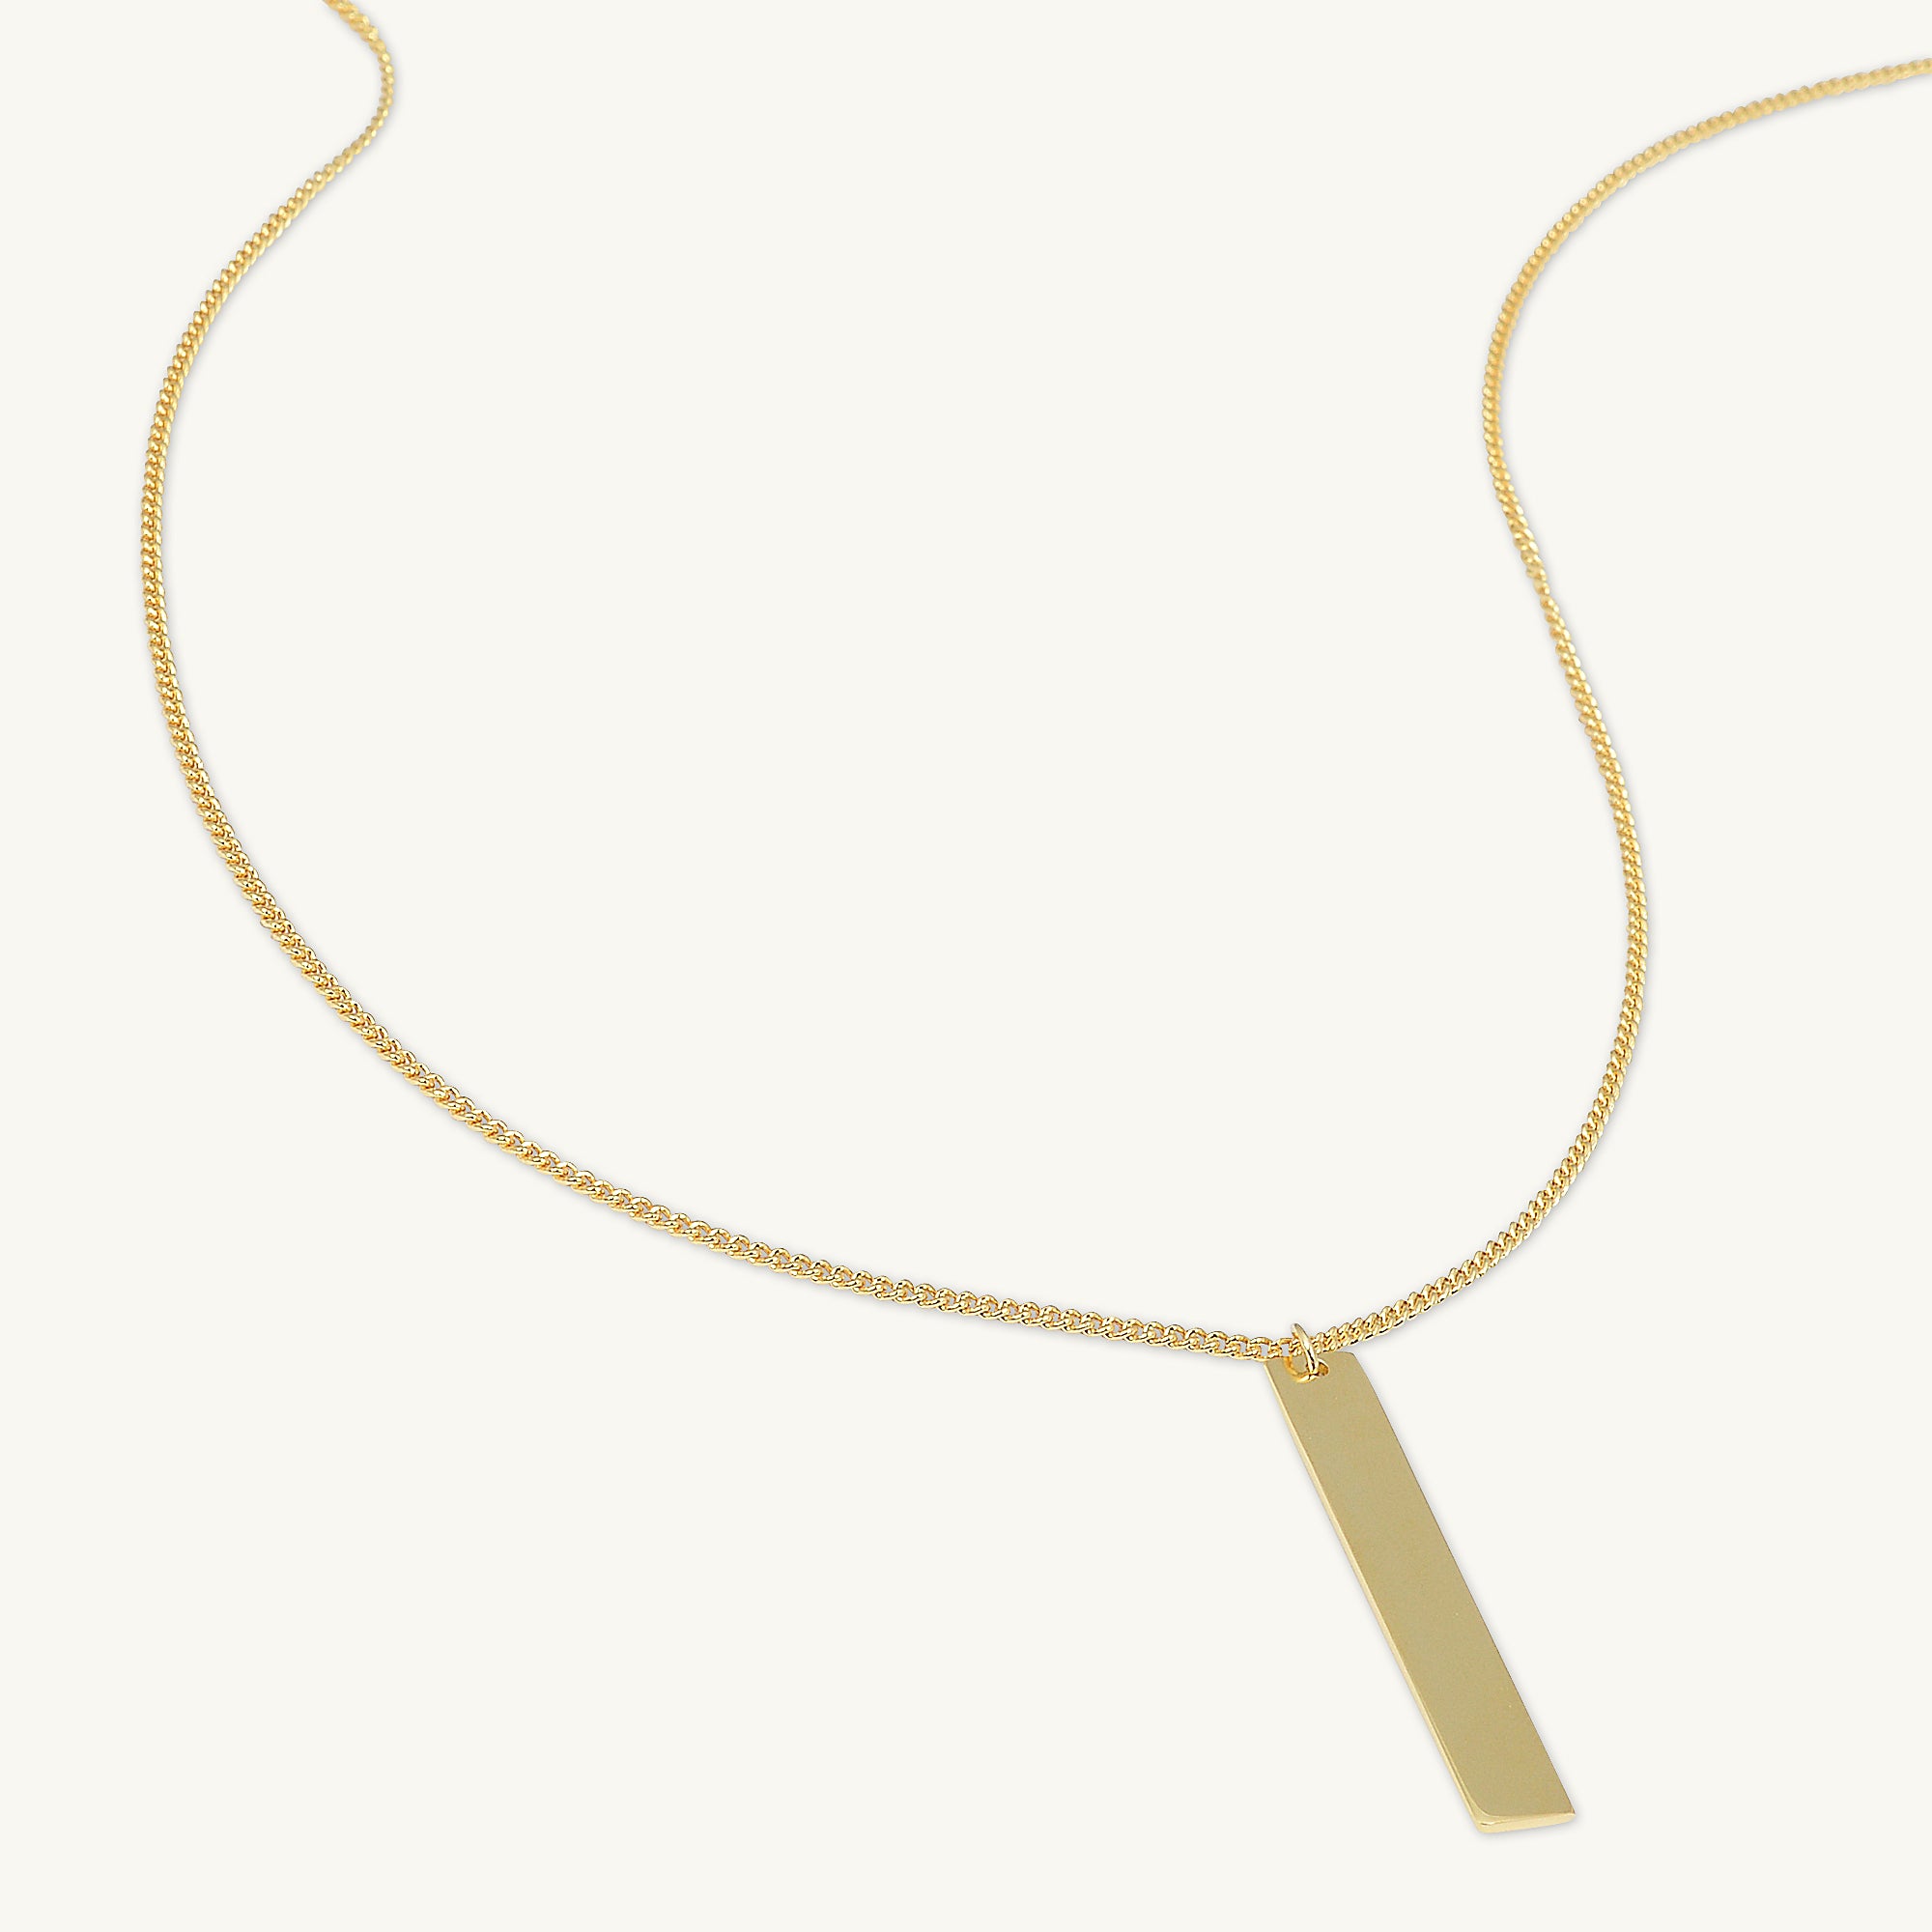 Engraved Personalised Vertical Bar Necklace